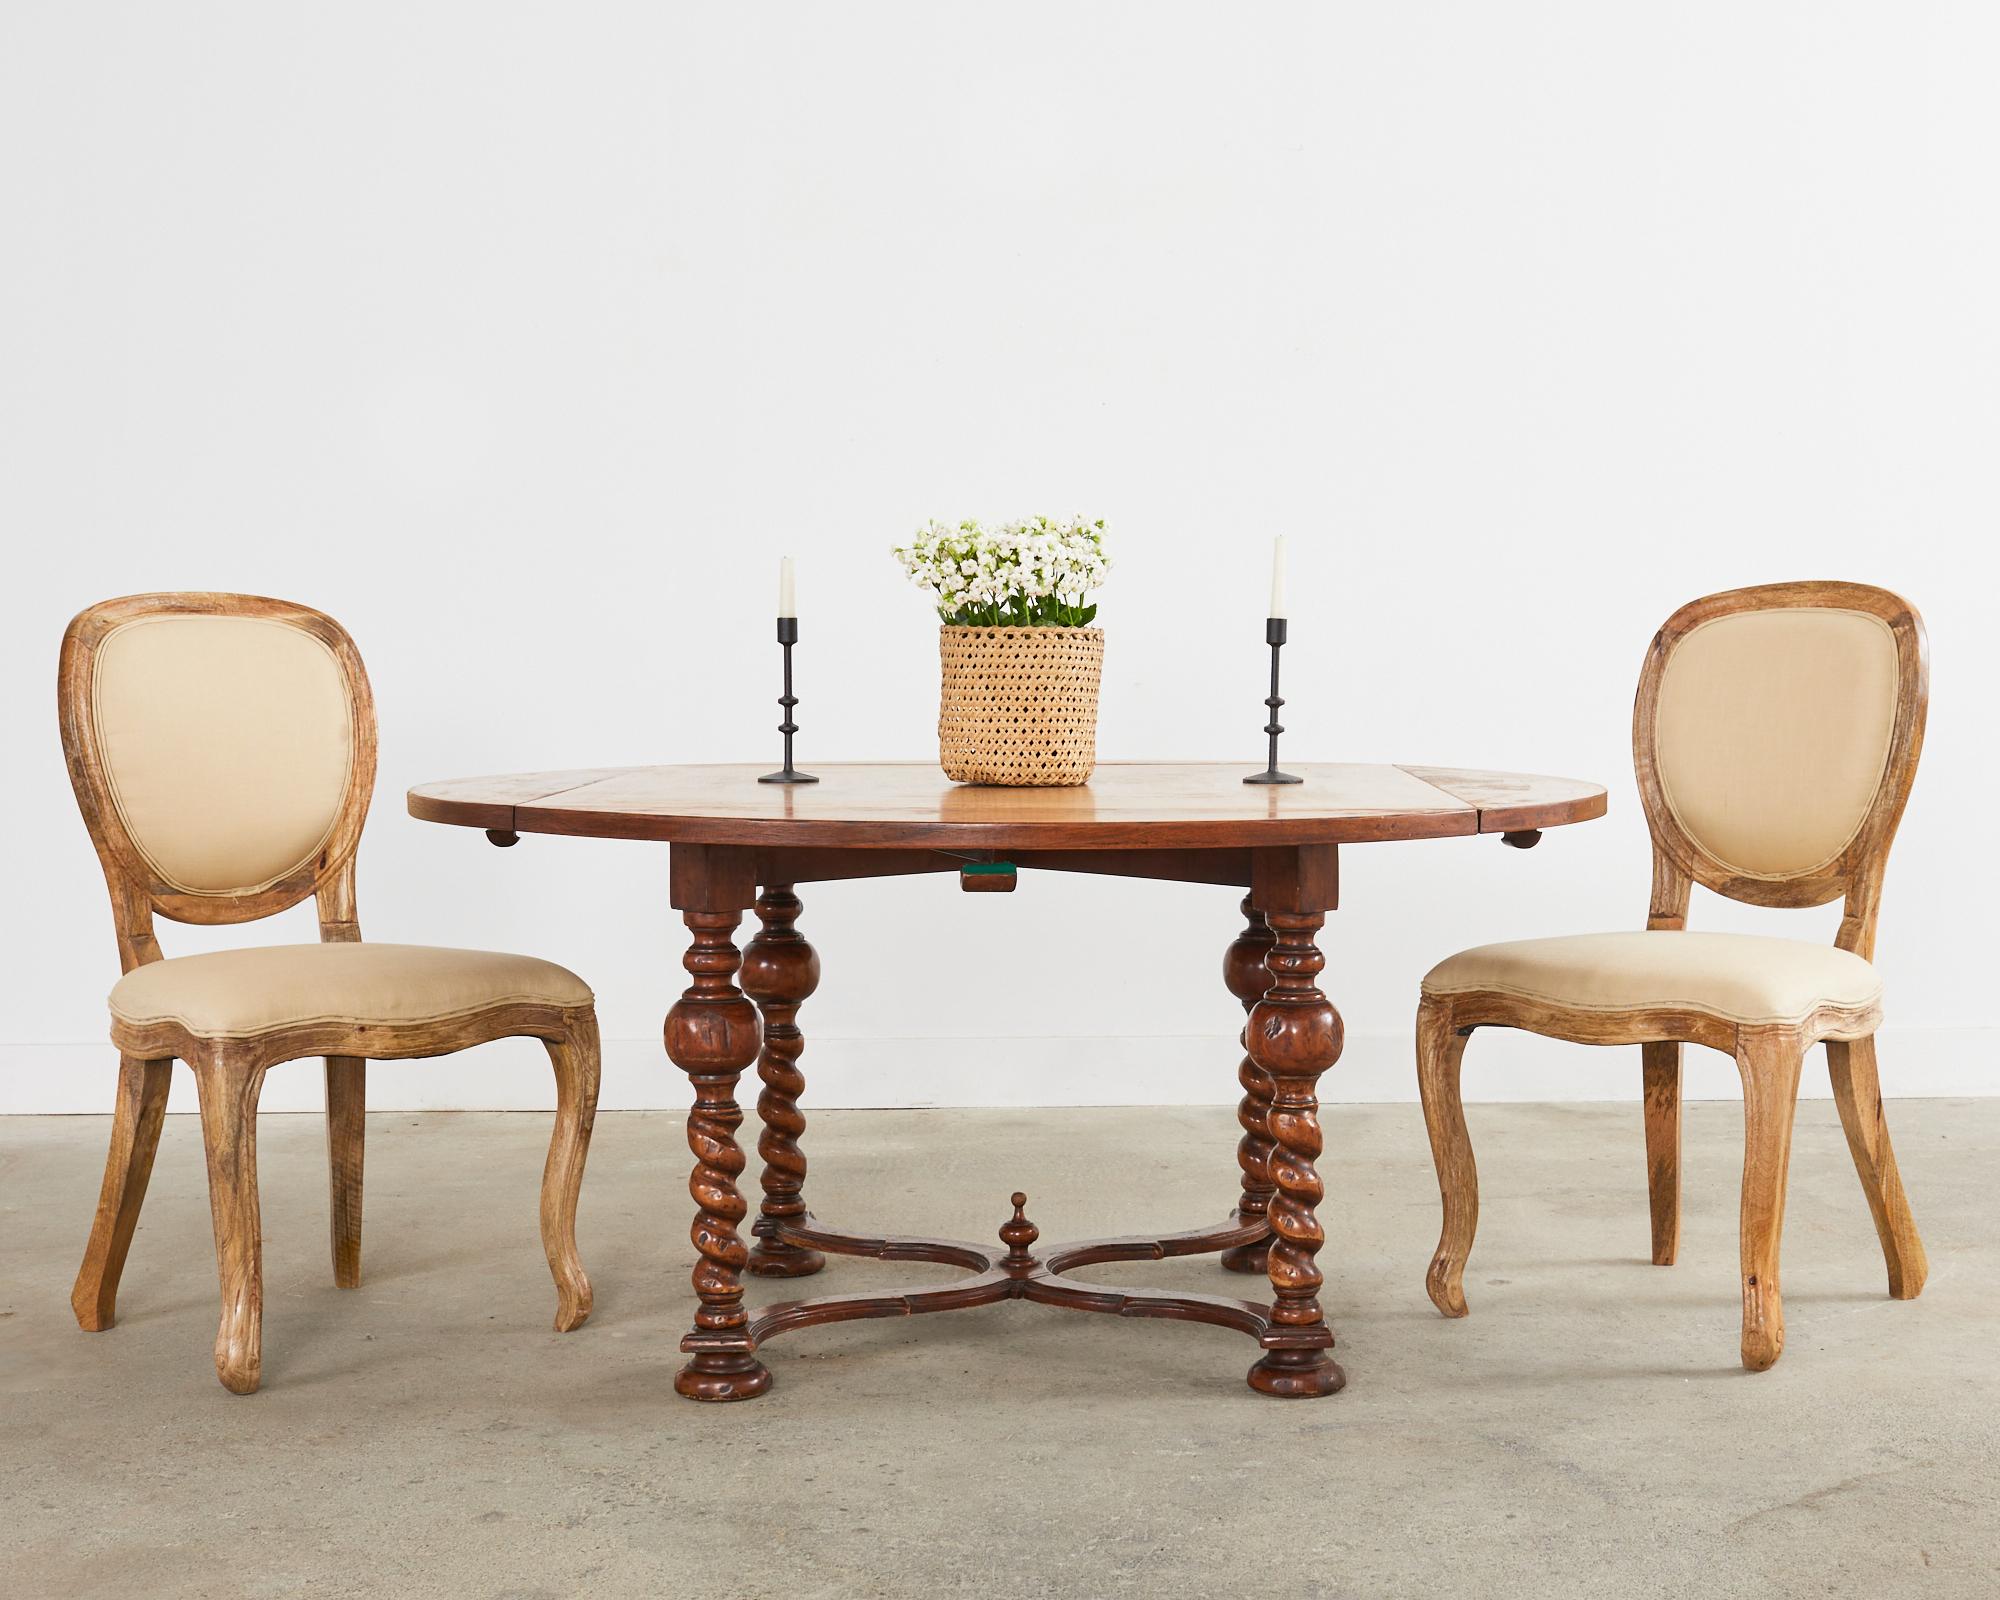 Magnificent country English dining table or center table featuring large barley twist legs. The round table has four drop-leaf sides converting the table from a 64 inch diameter circle to a 45.5 inch wide square table. The 1 inch thick top is